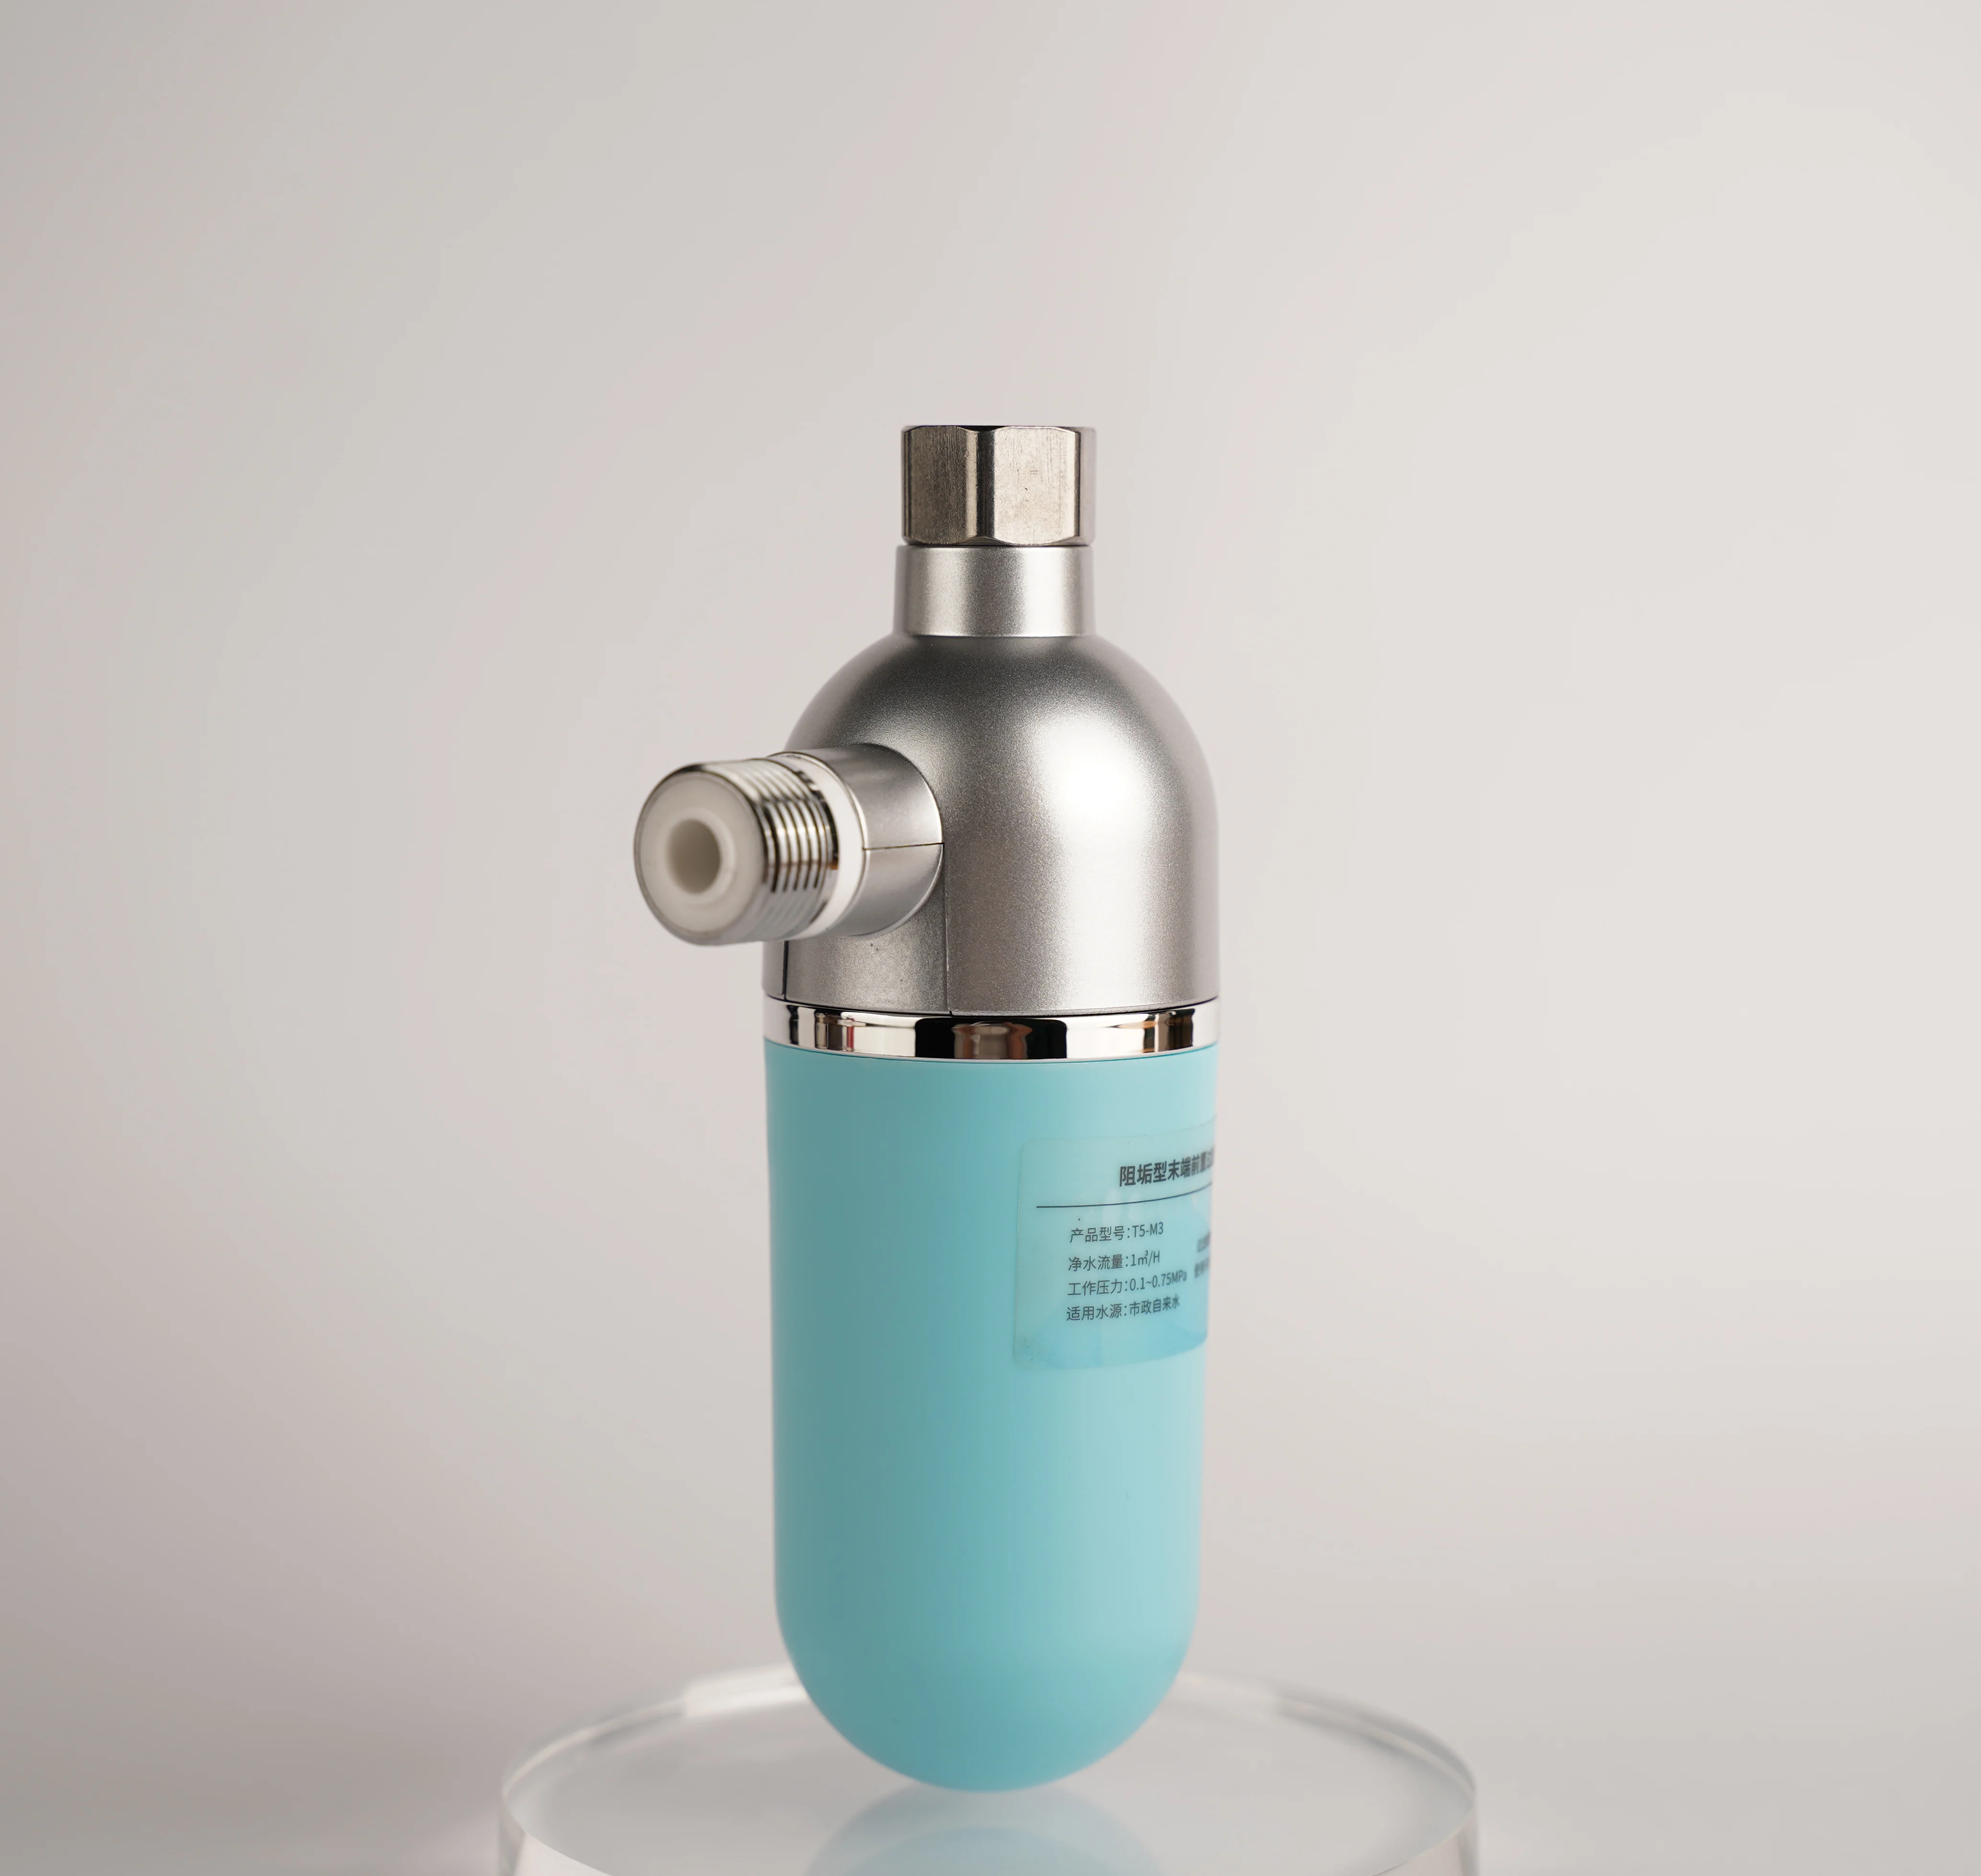 High Output Revitalizing Shower Filter Reduces Dry Itchy Skin Dramatically Improves the Condition of Skin Hair